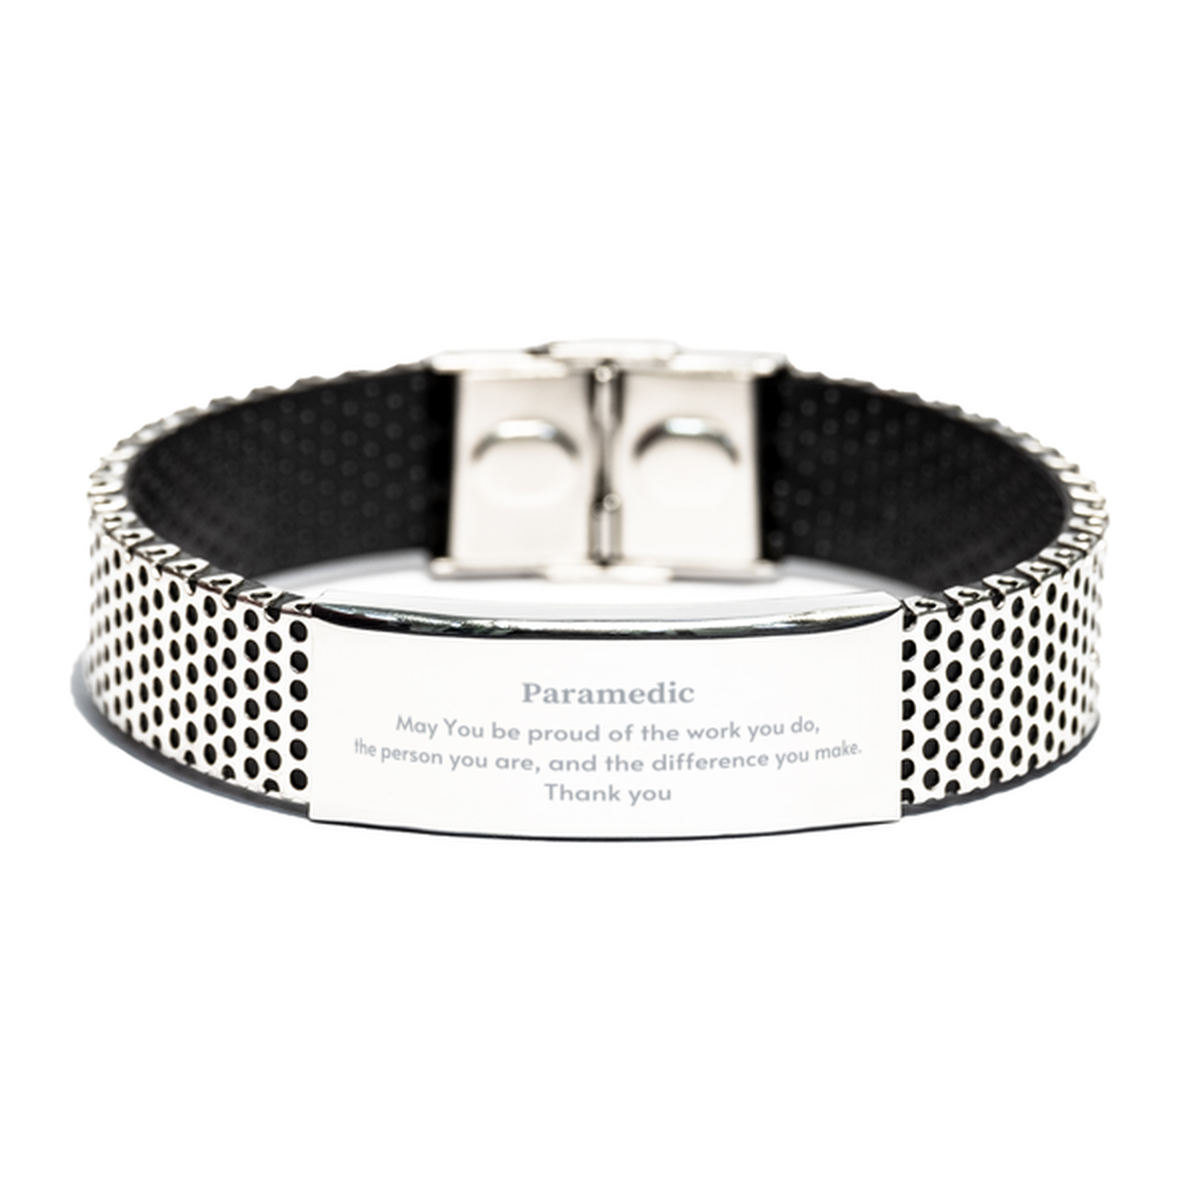 Heartwarming Stainless Steel Bracelet Retirement Coworkers Gifts for Paramedic, Paramedic May You be proud of the work you do, the person you are Gifts for Boss Men Women Friends